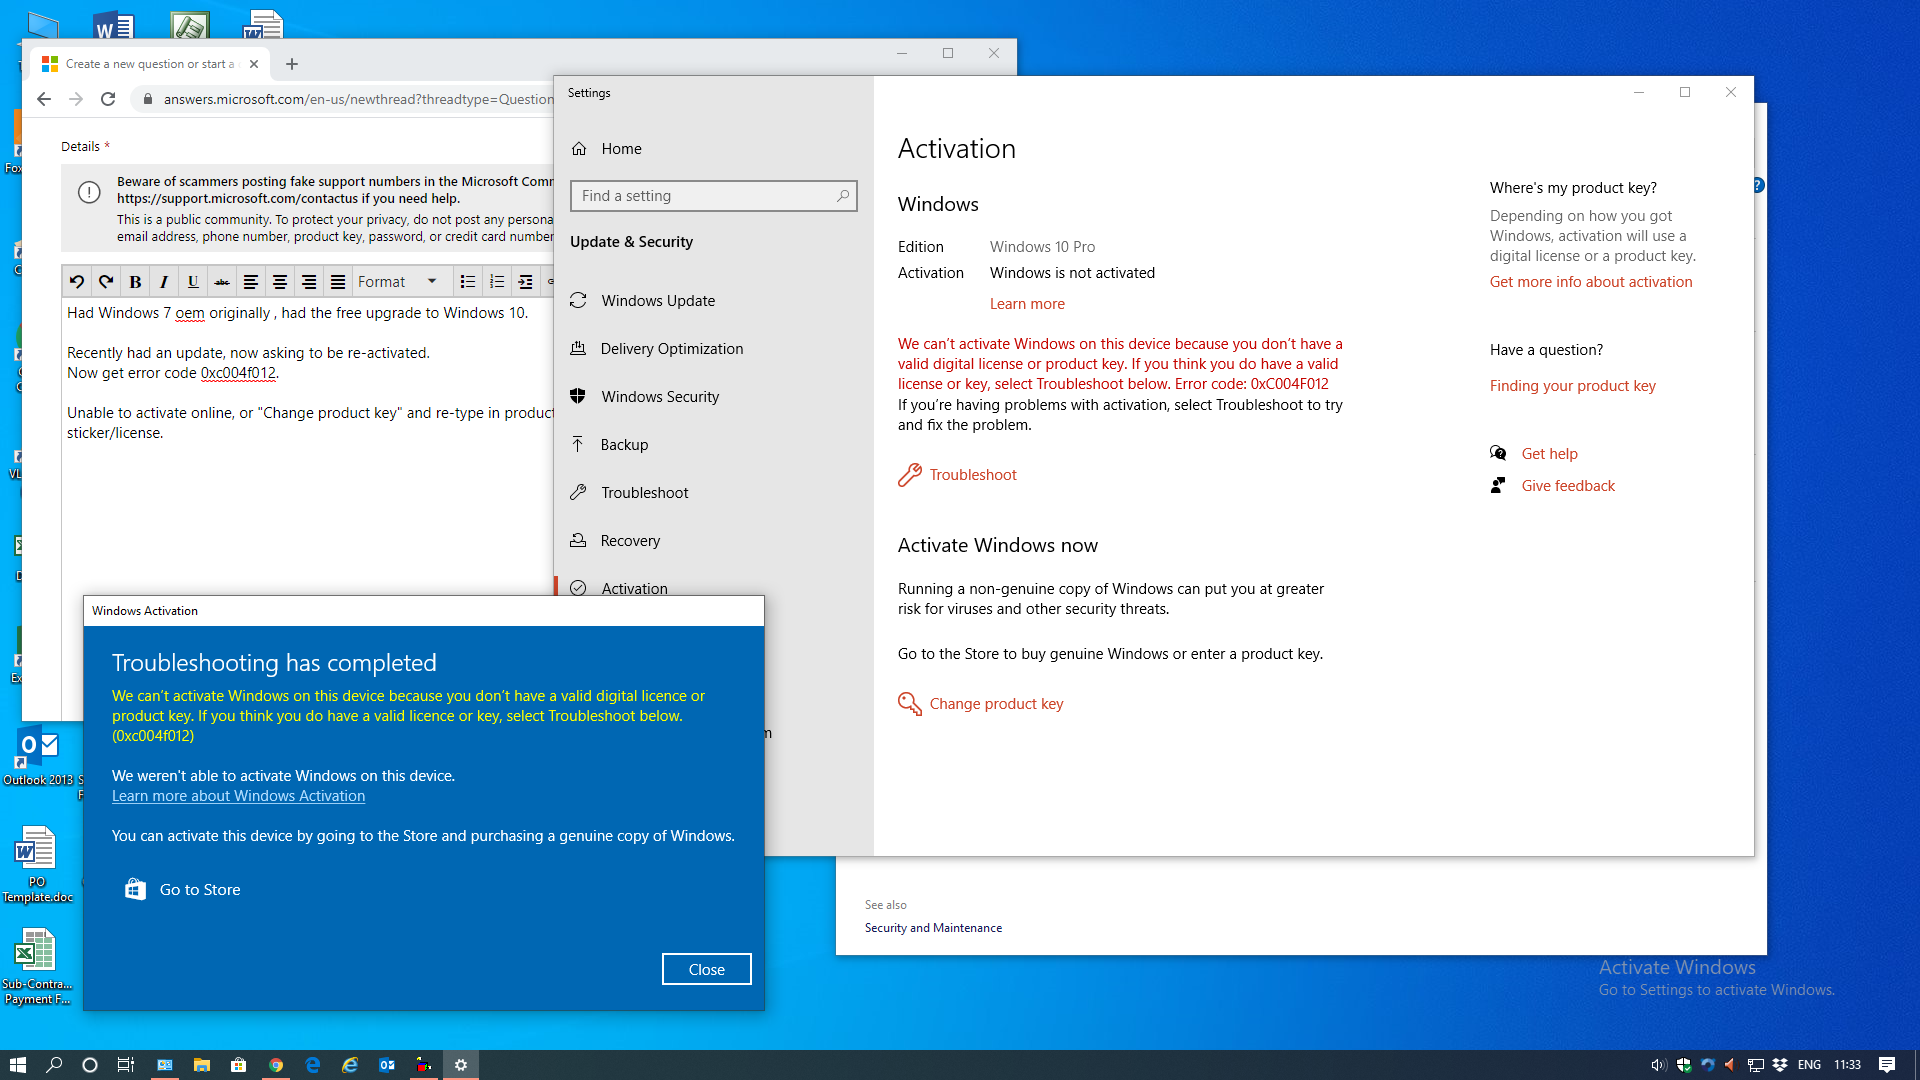 Unable re-activate windows 10, from previous windows 7 oem - Microsoft Community